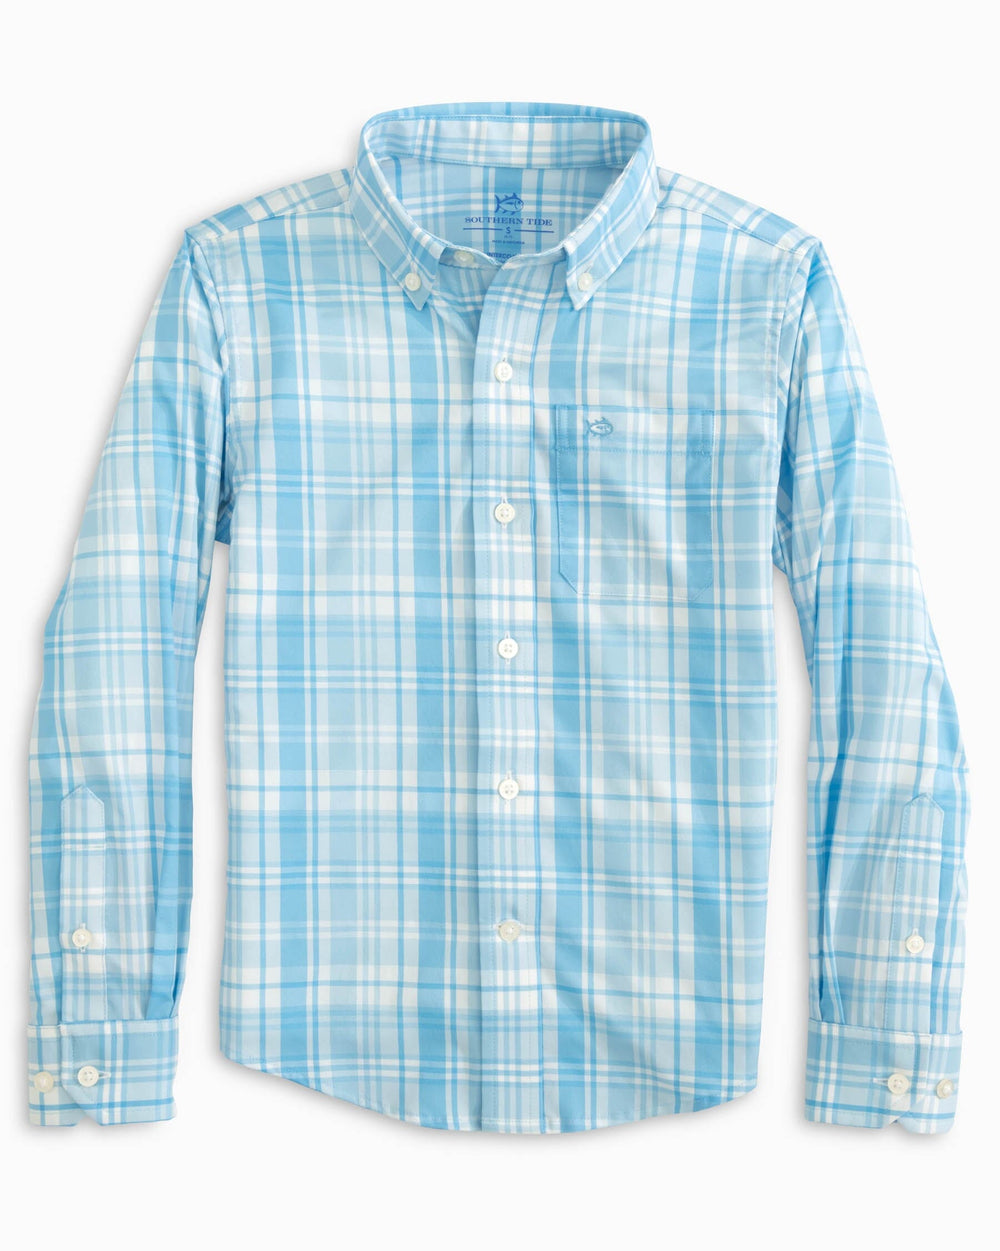 The front view of the Southern Tide Youth Palm Canyon Plaid Intercoastal Sport Shirt by Southern Tide - Rain Water